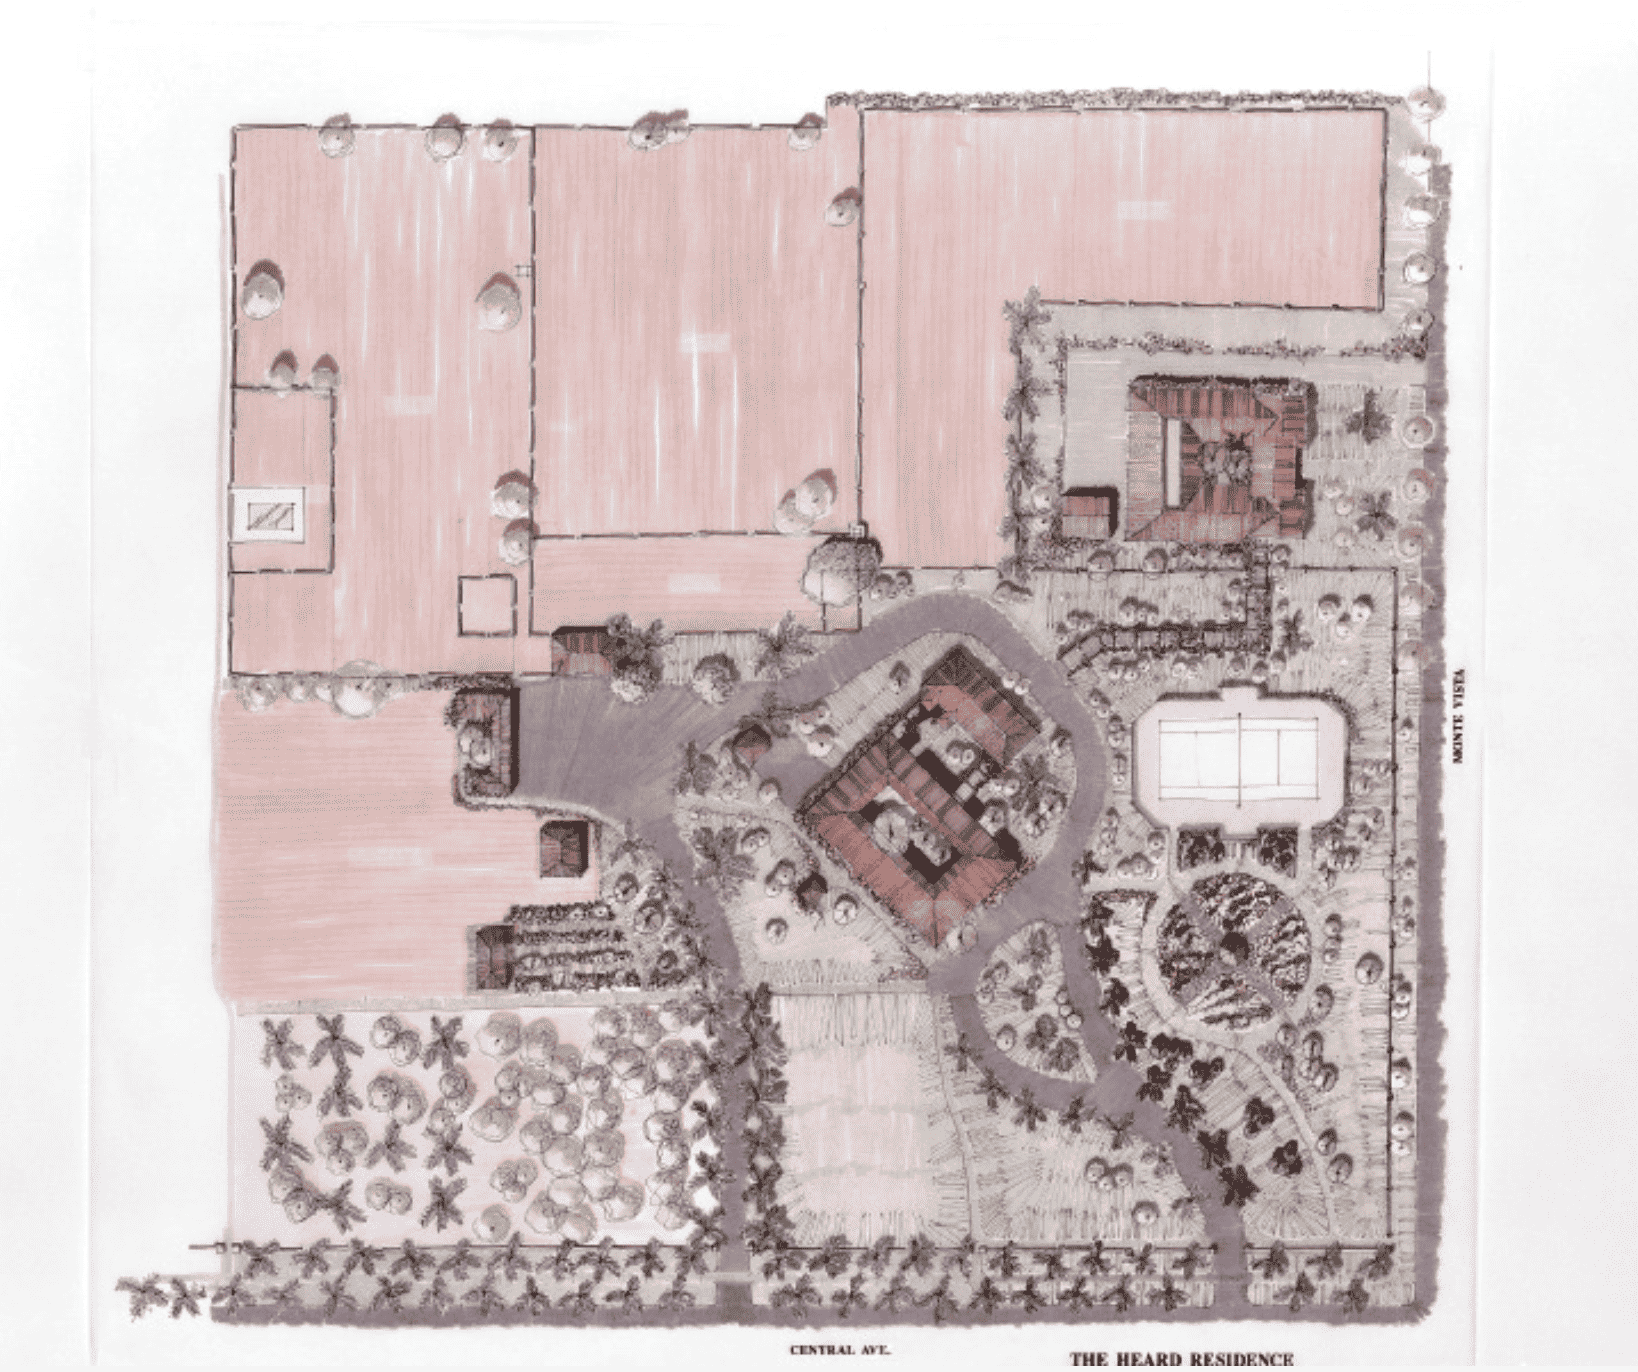 A drawing of a site plan for an apartment complex.